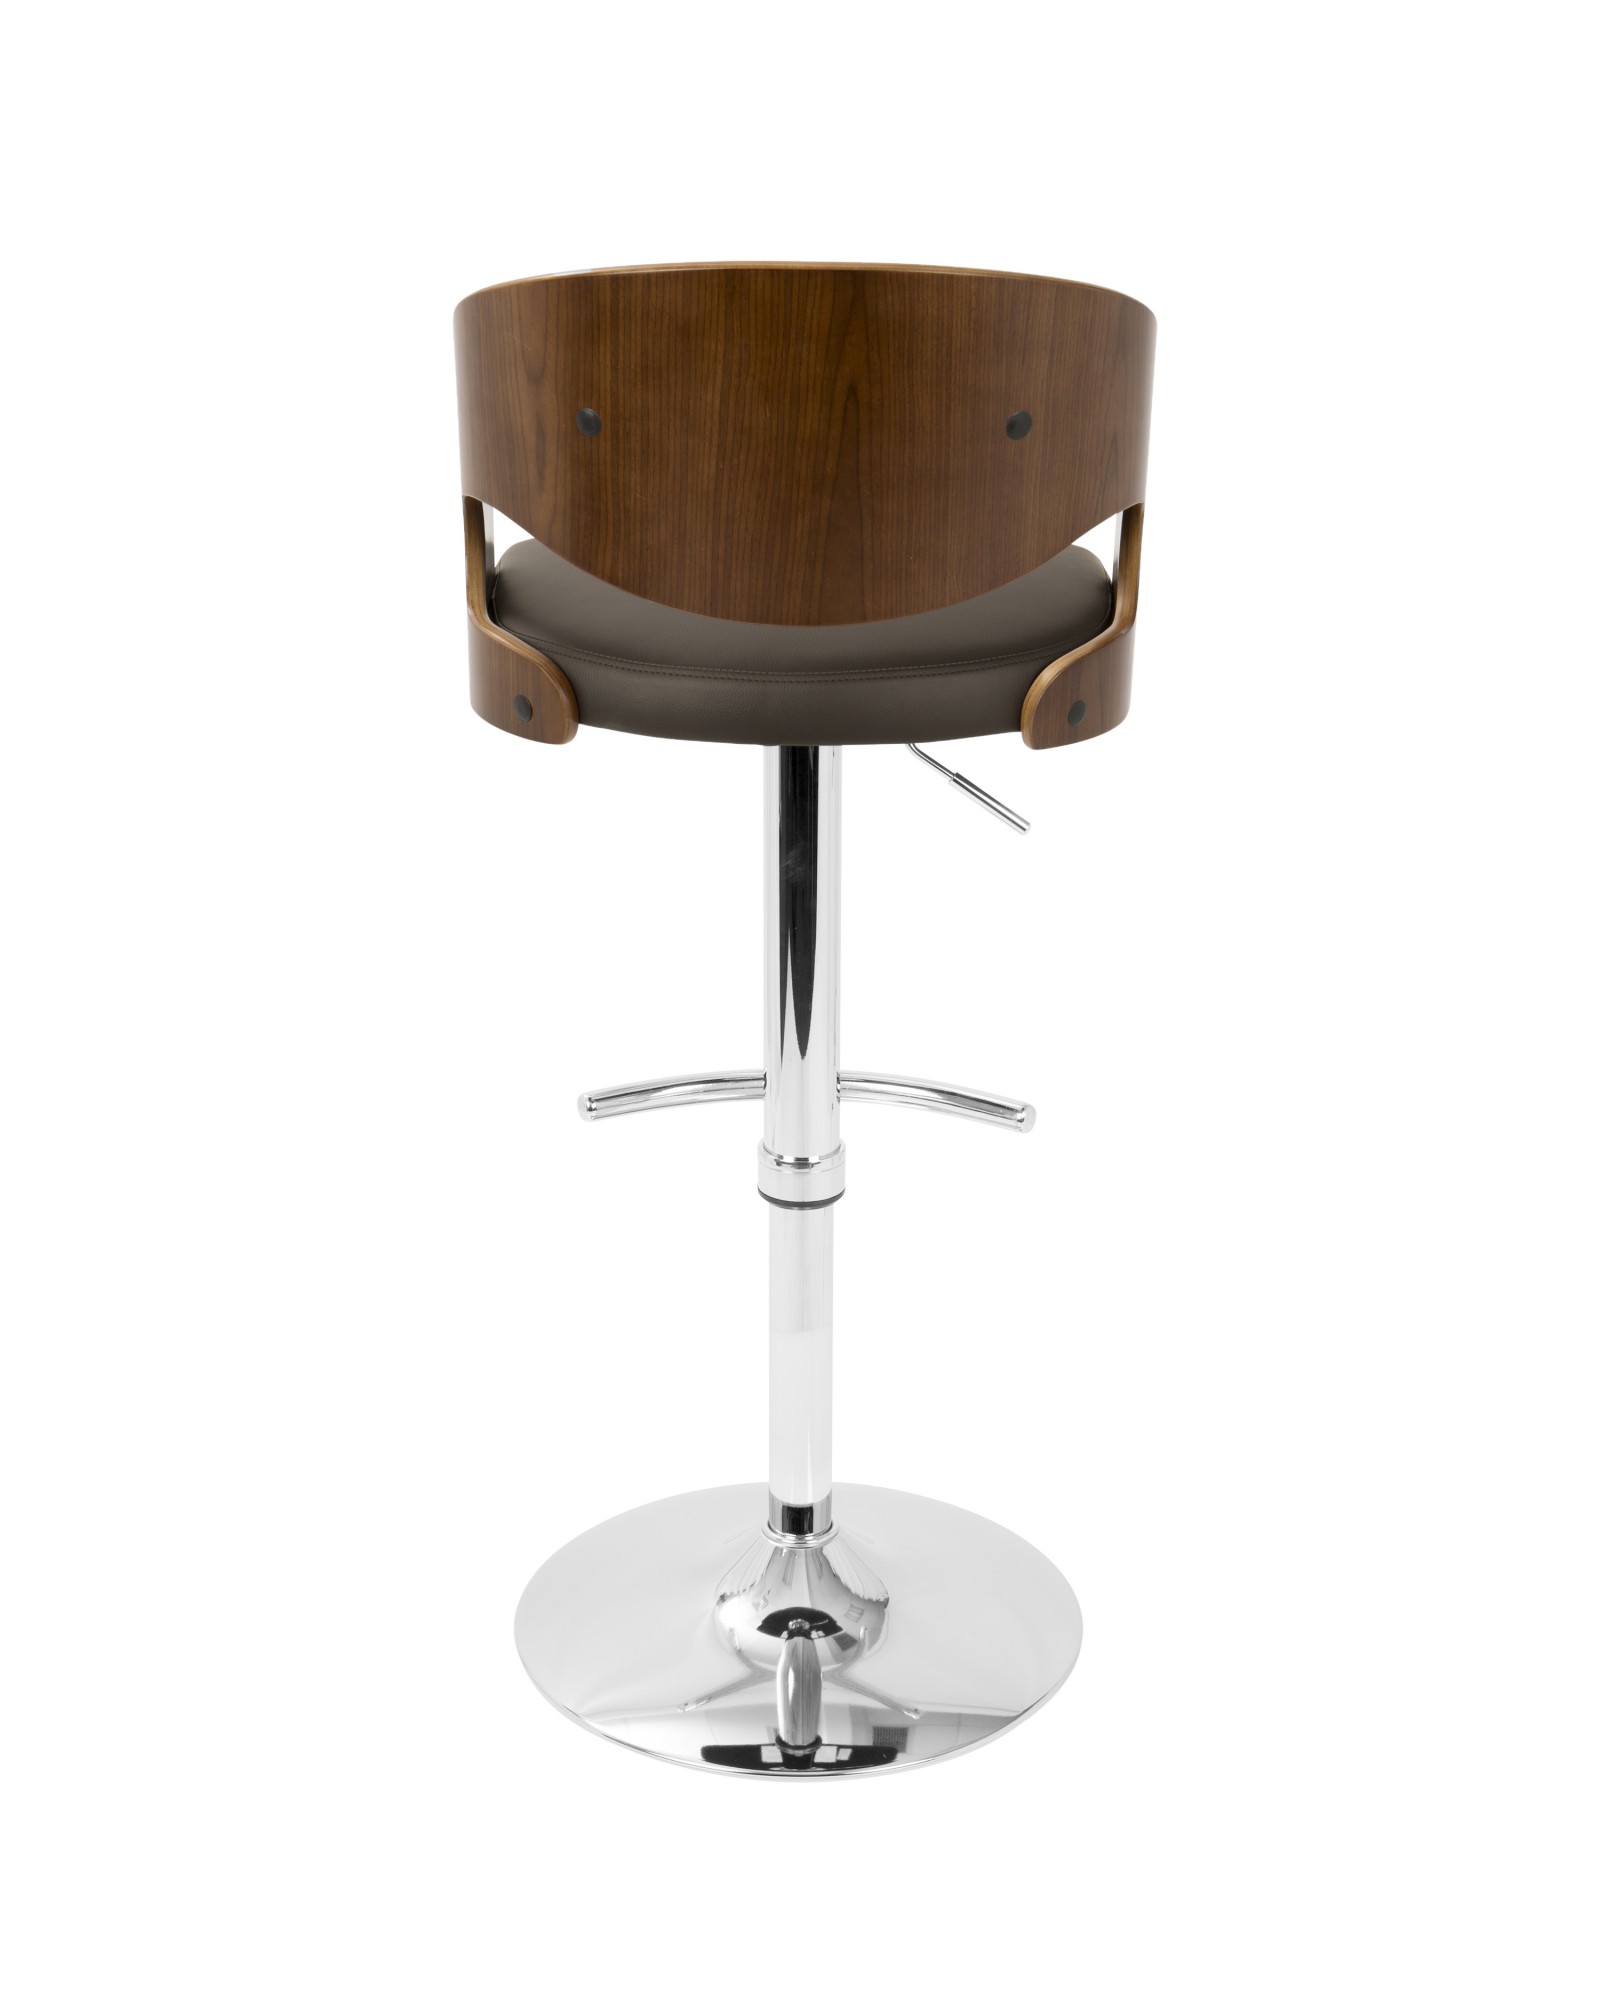 Pino Mid-Century Modern Adjustable Barstool with Swivel in Walnut and Brown Faux Leather